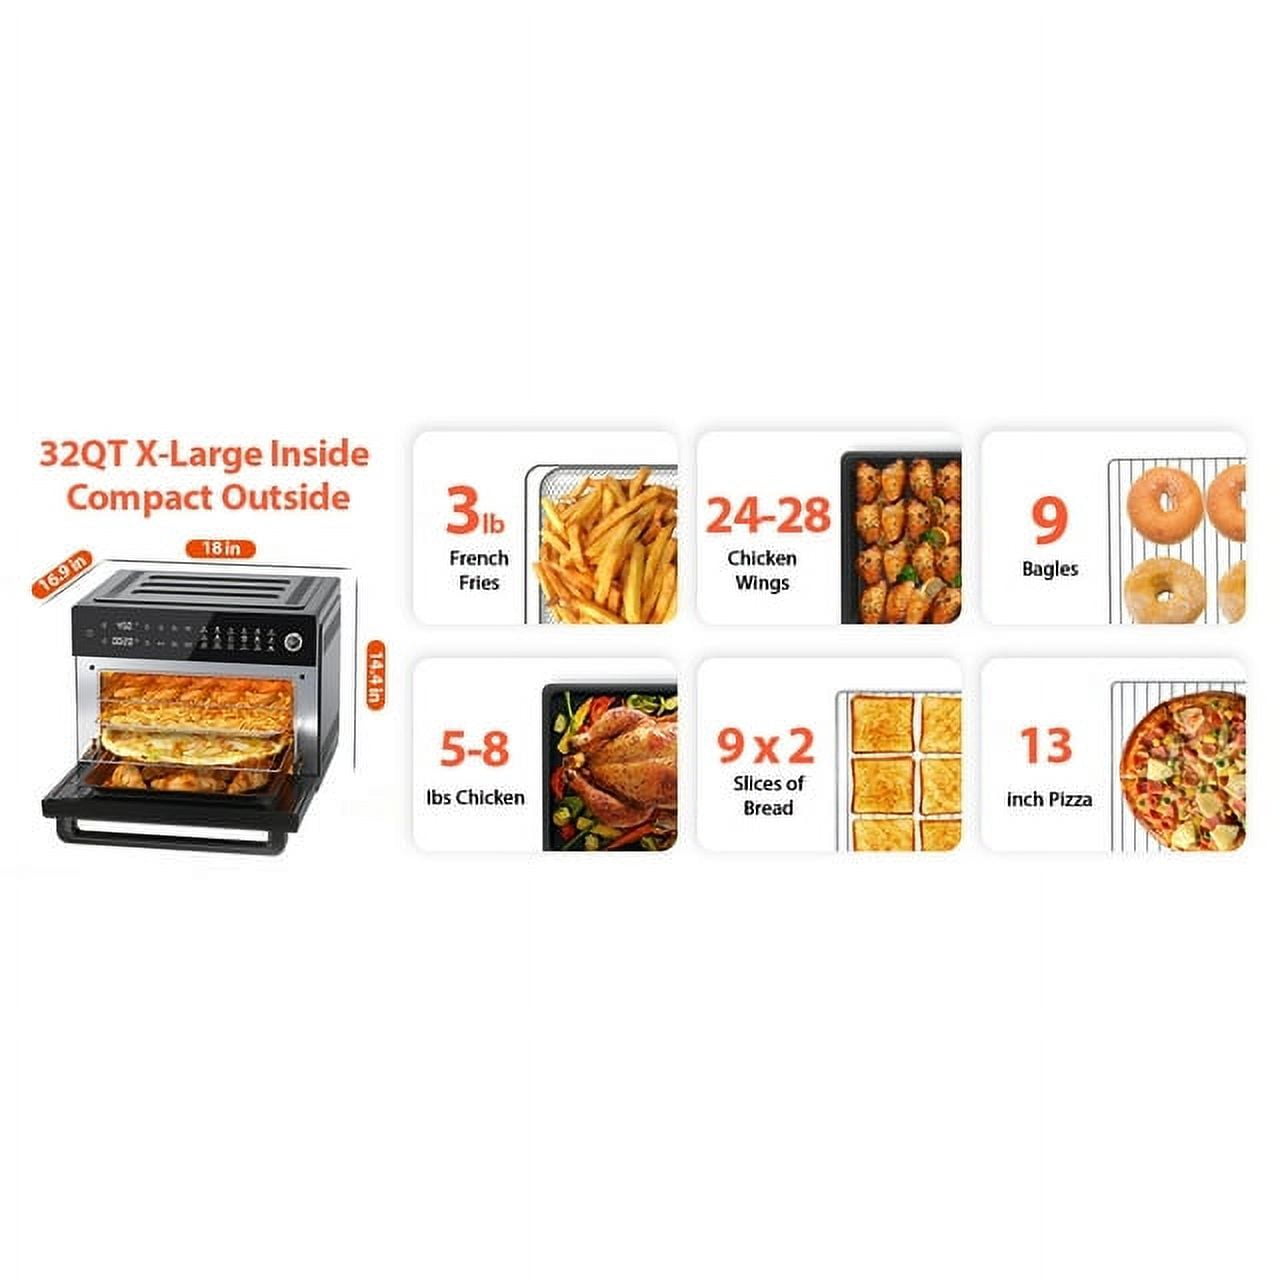 Aeitto® 32-Quart PRO Large Air Fryer Oven